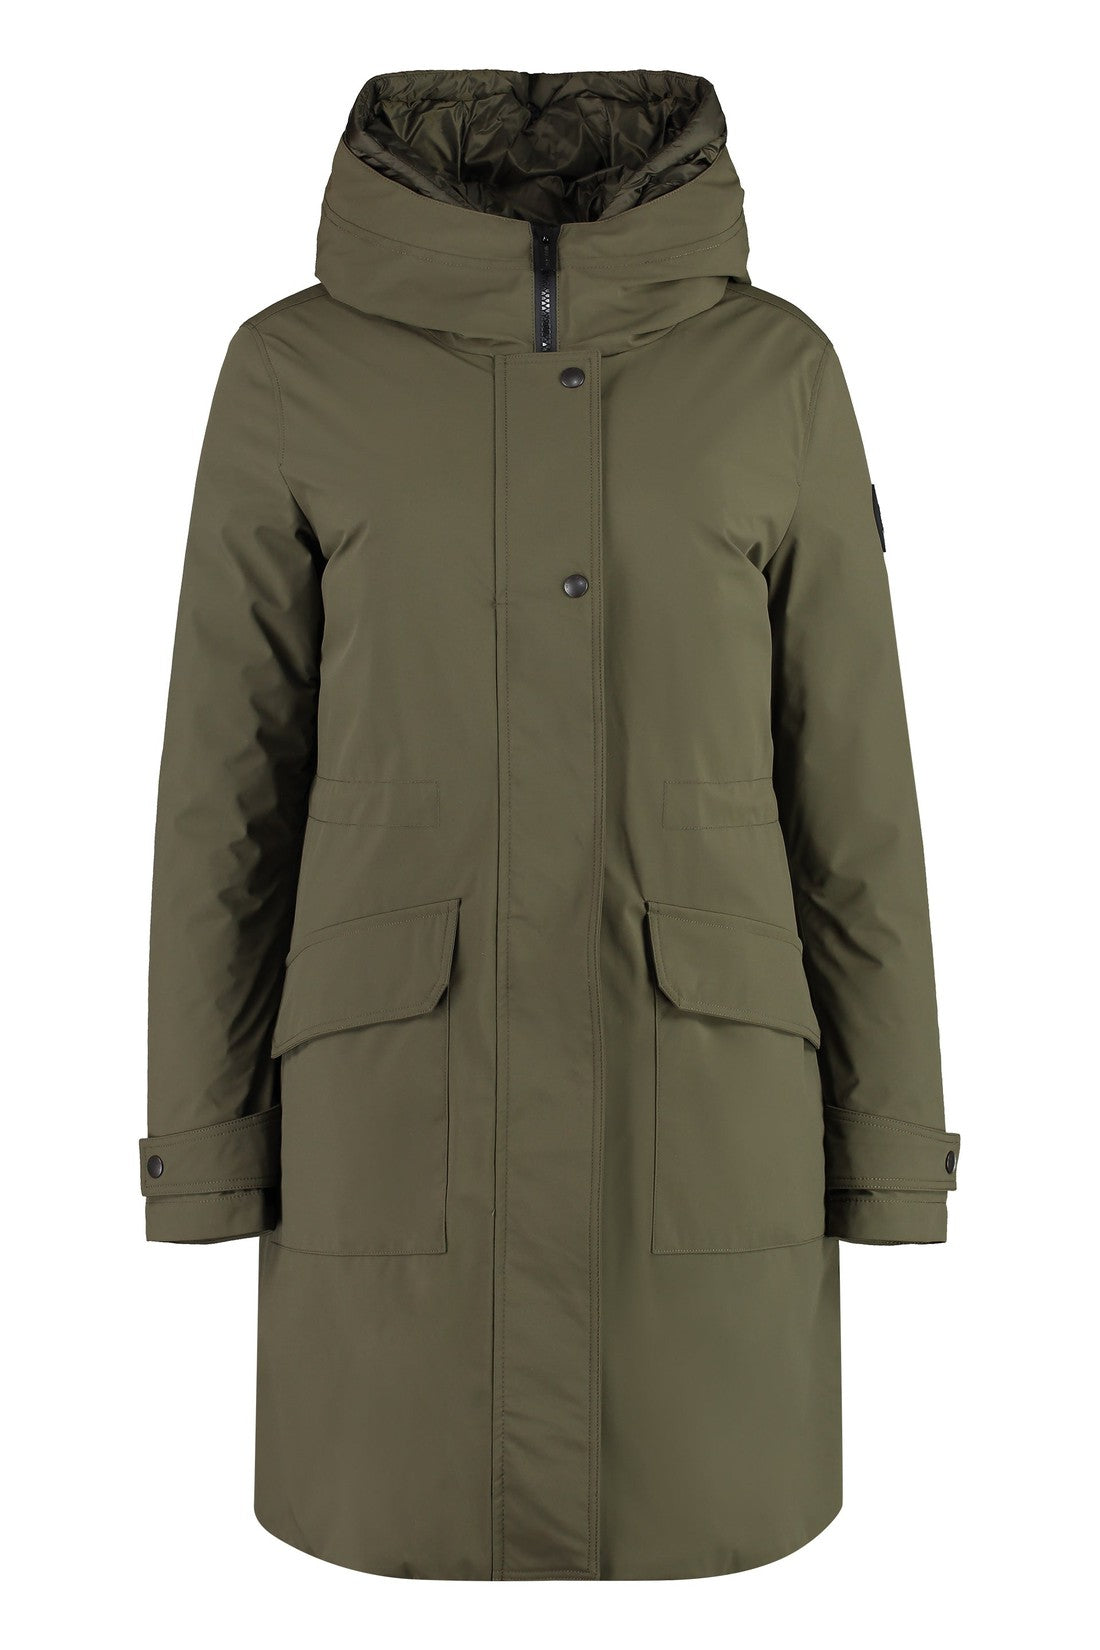 Woolrich-OUTLET-SALE-Military technical fabric parka with internal removable down jacket-ARCHIVIST